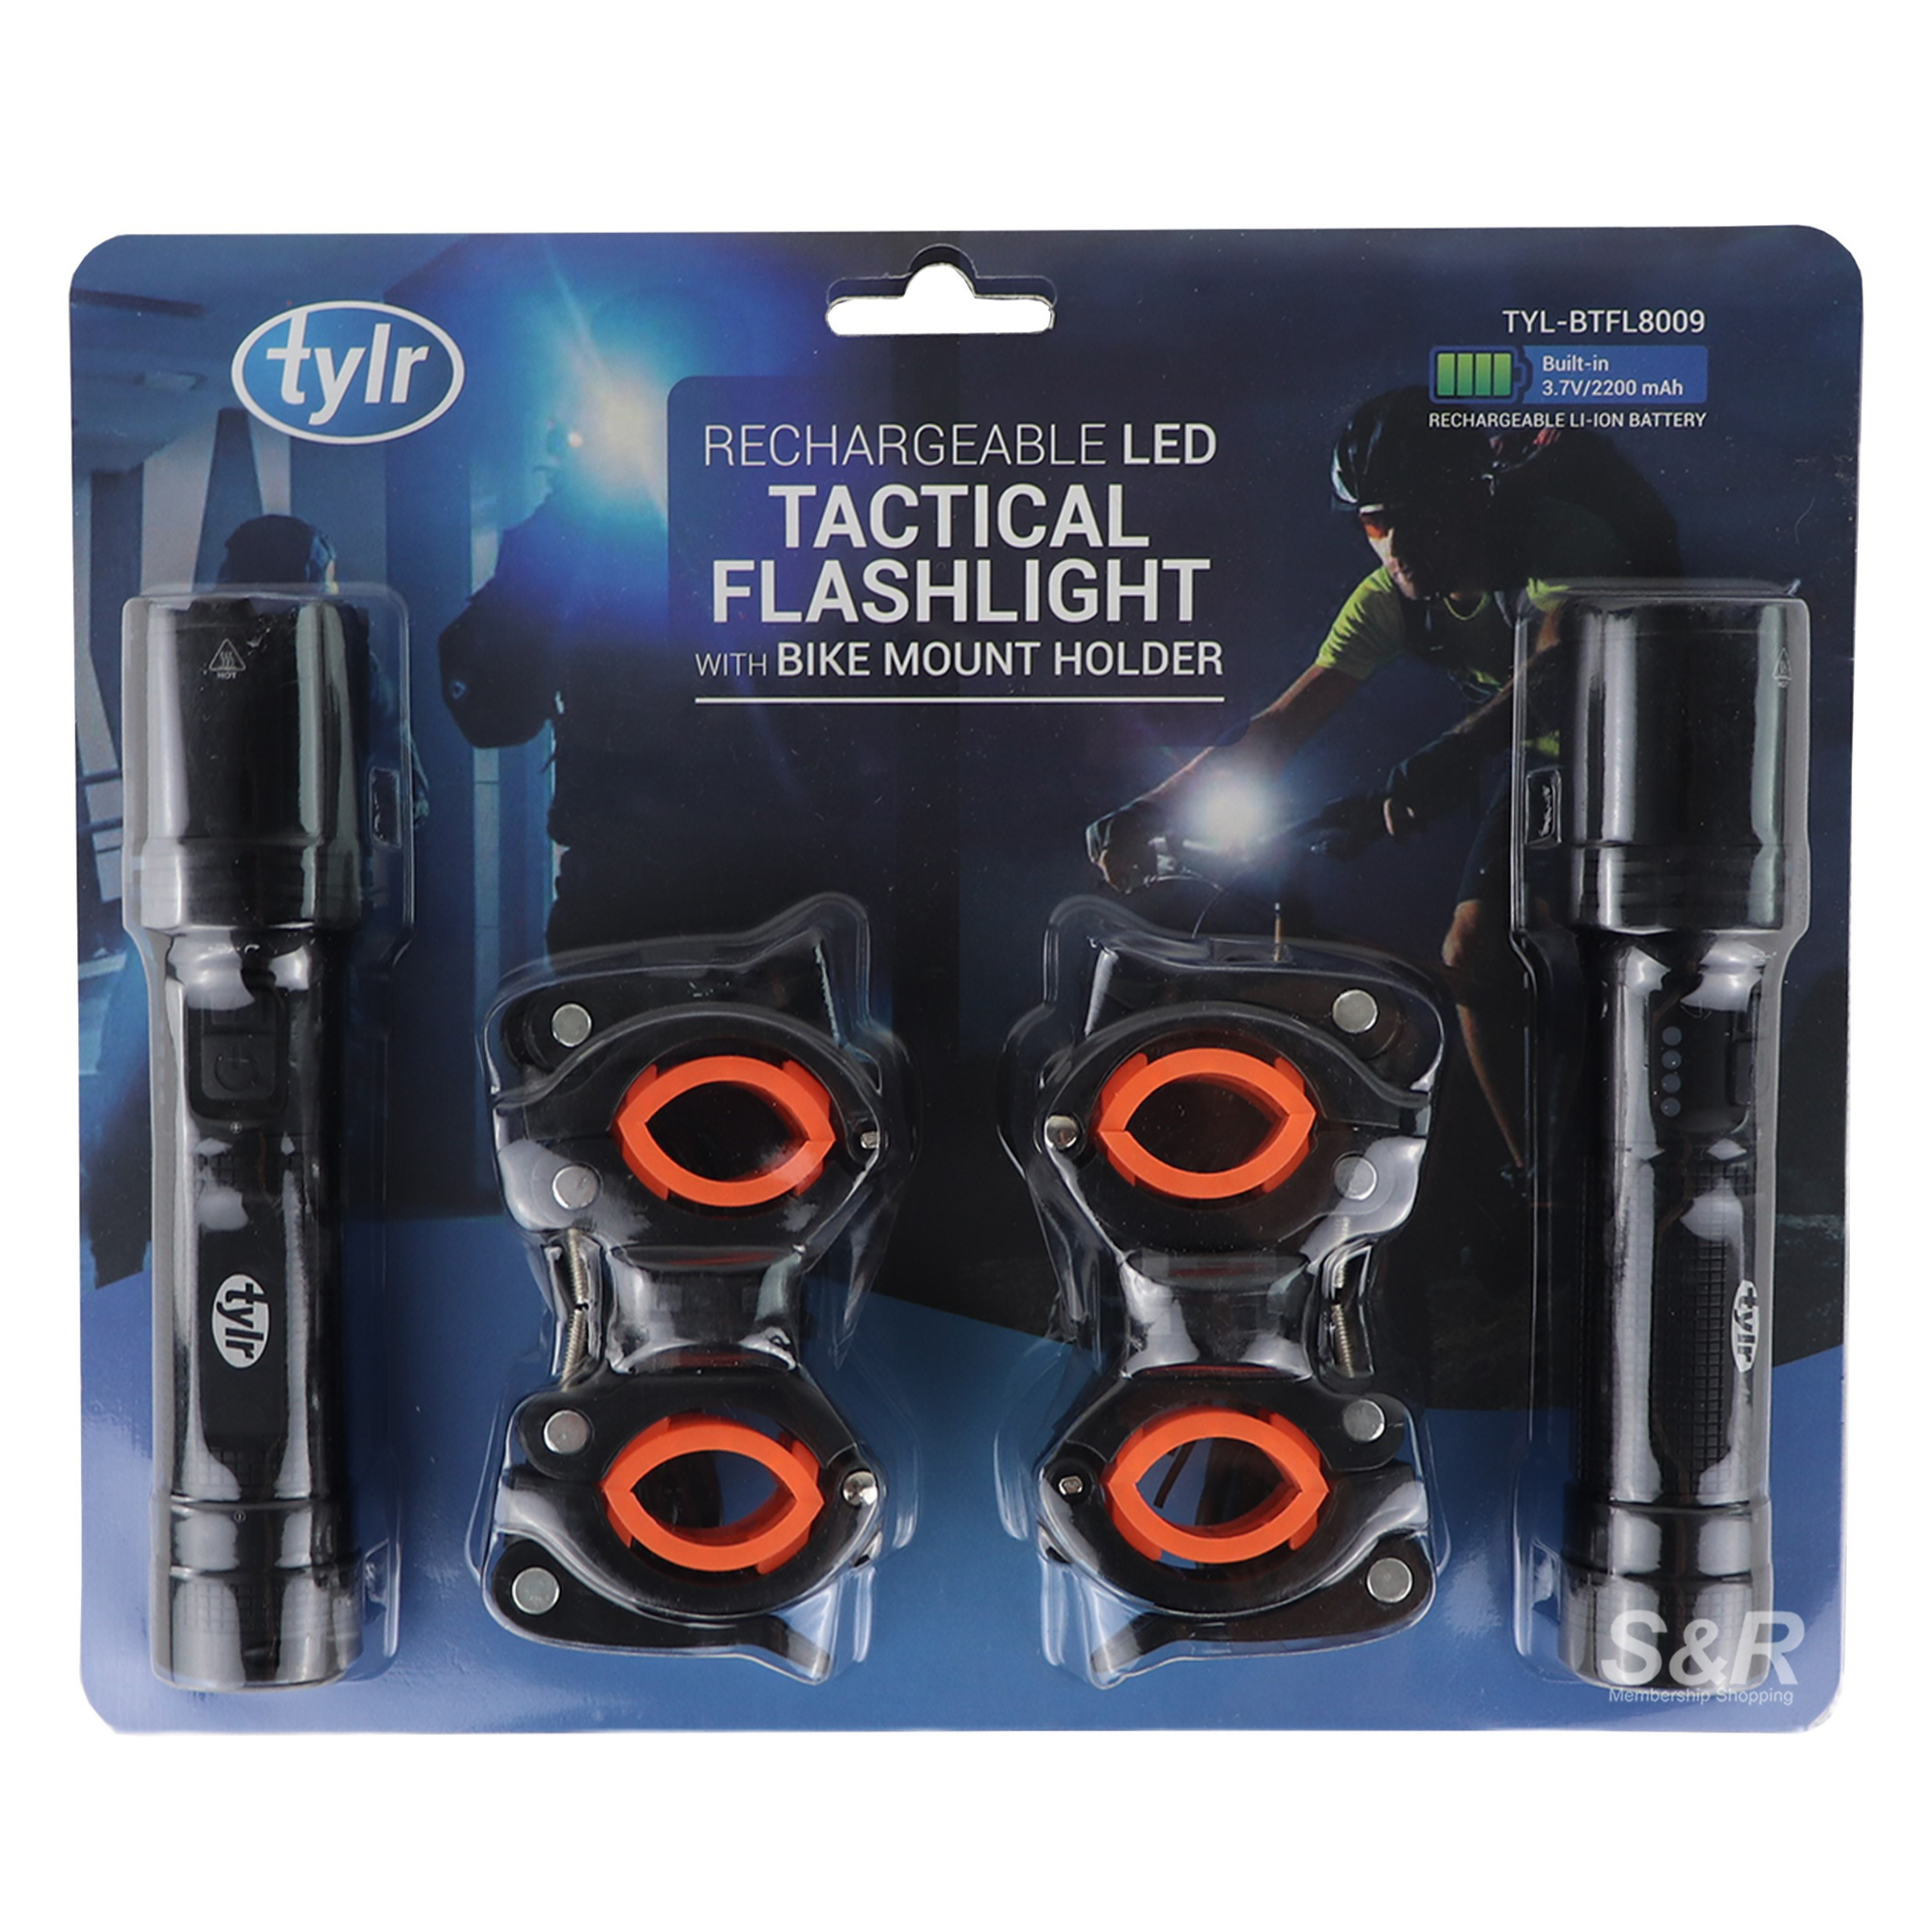 Tylr Rechargeable LED Tactical Flashlight With Bike Mount Holder TYL-BTFL8009